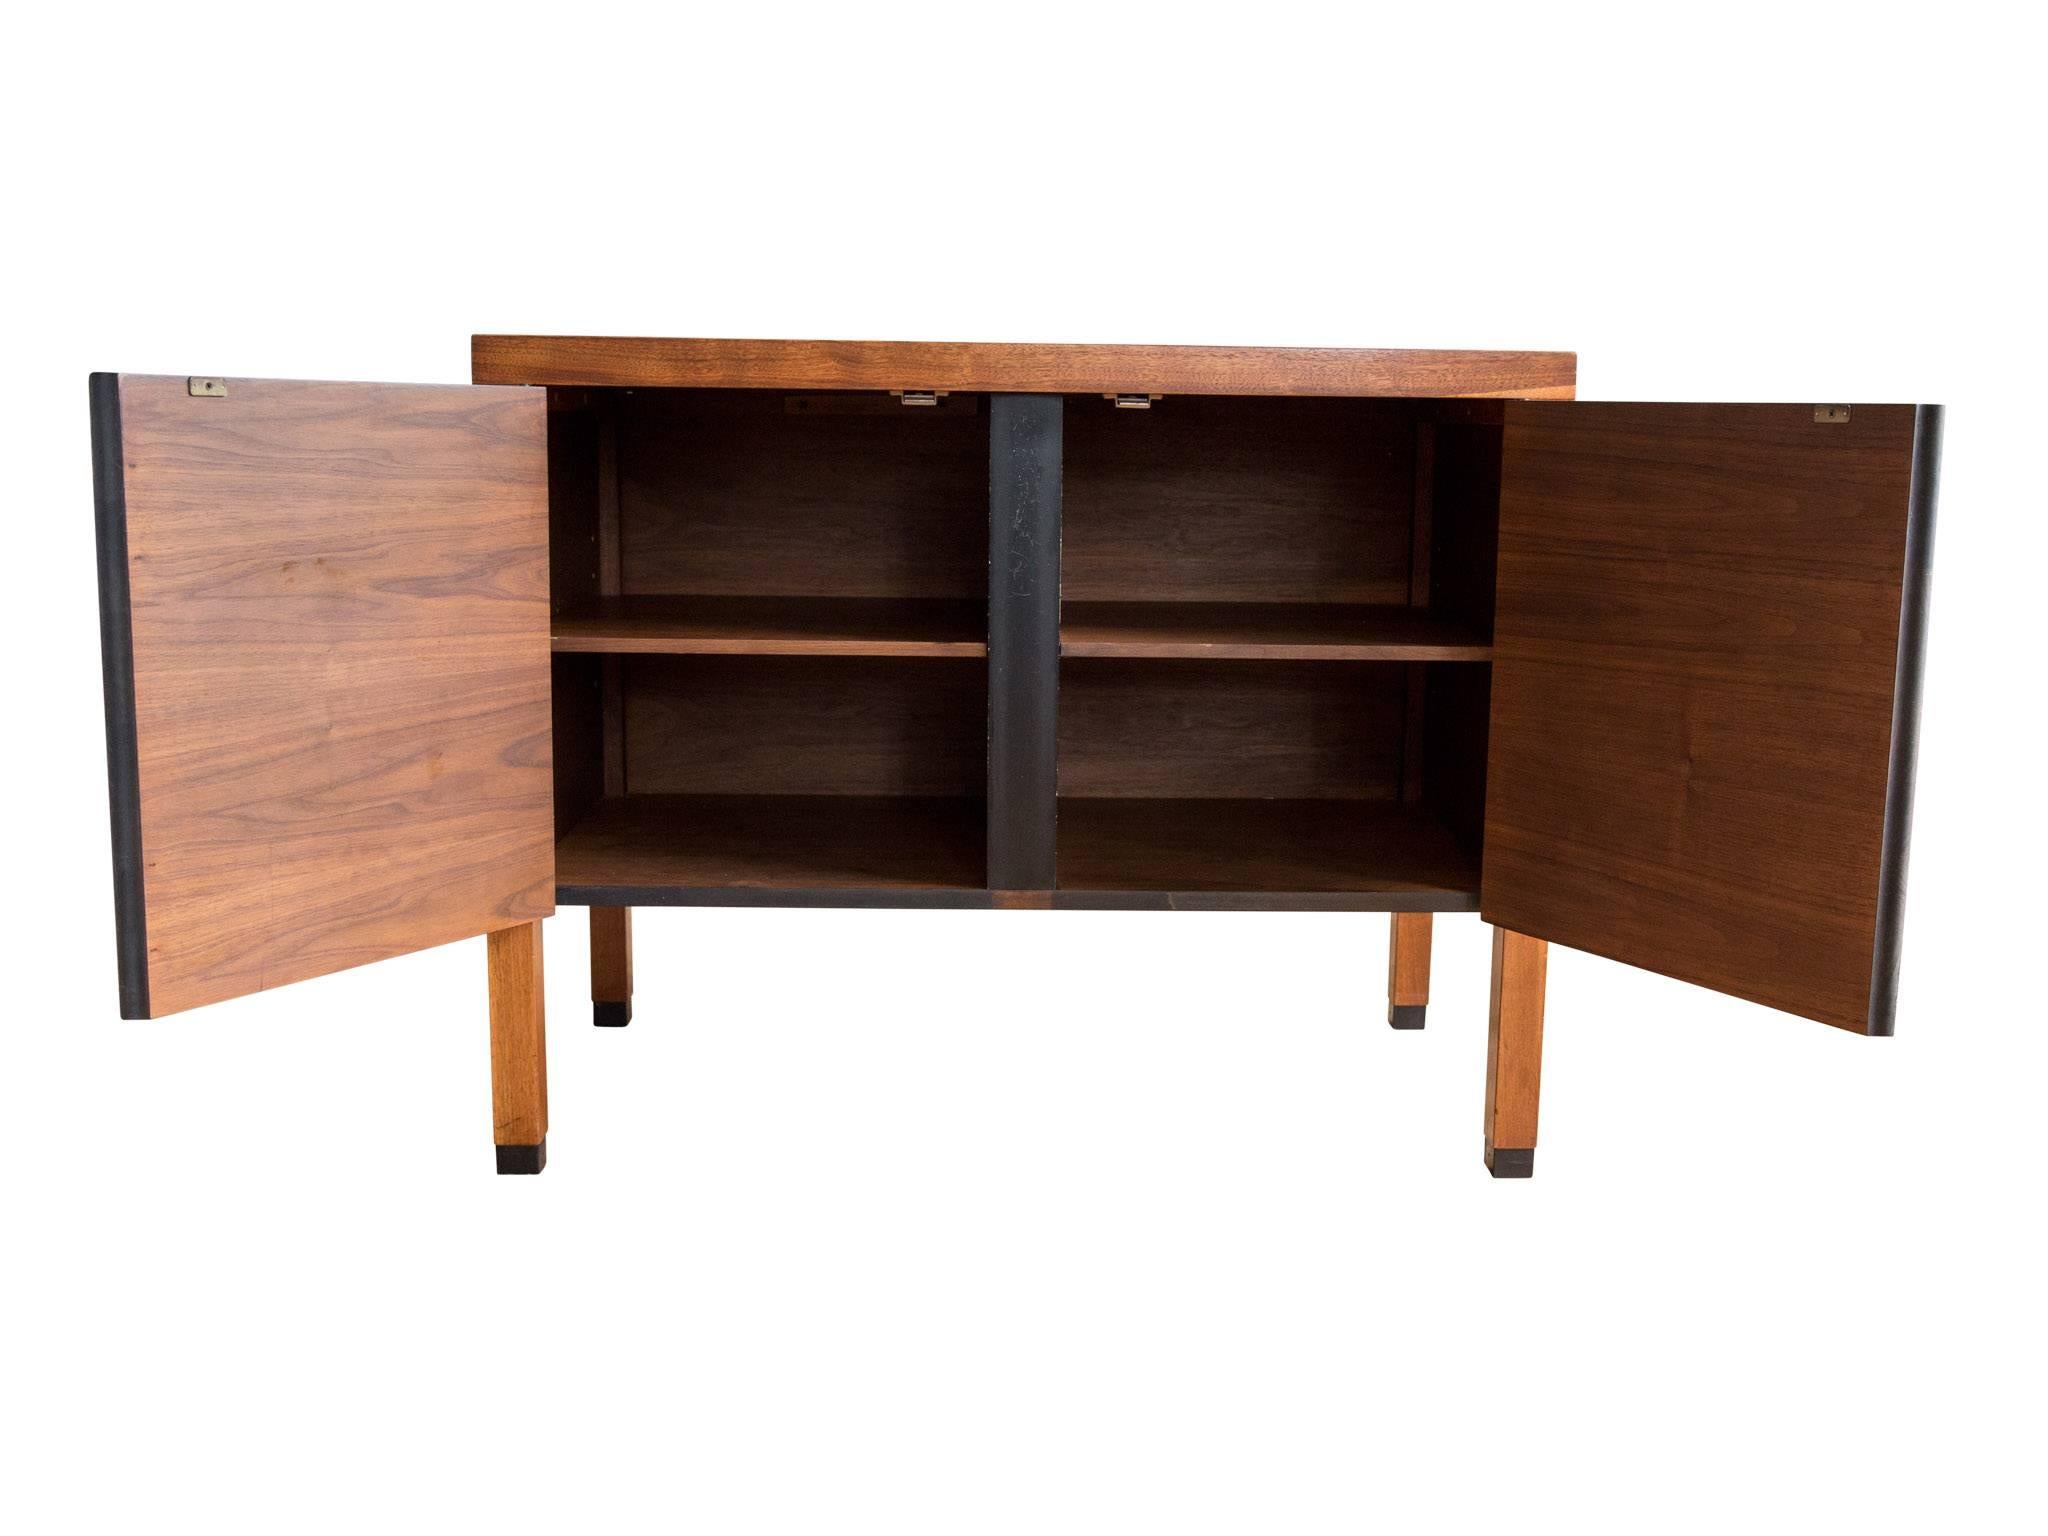 American Walnut Cabinet Attributed to Paul McCobb for Directional